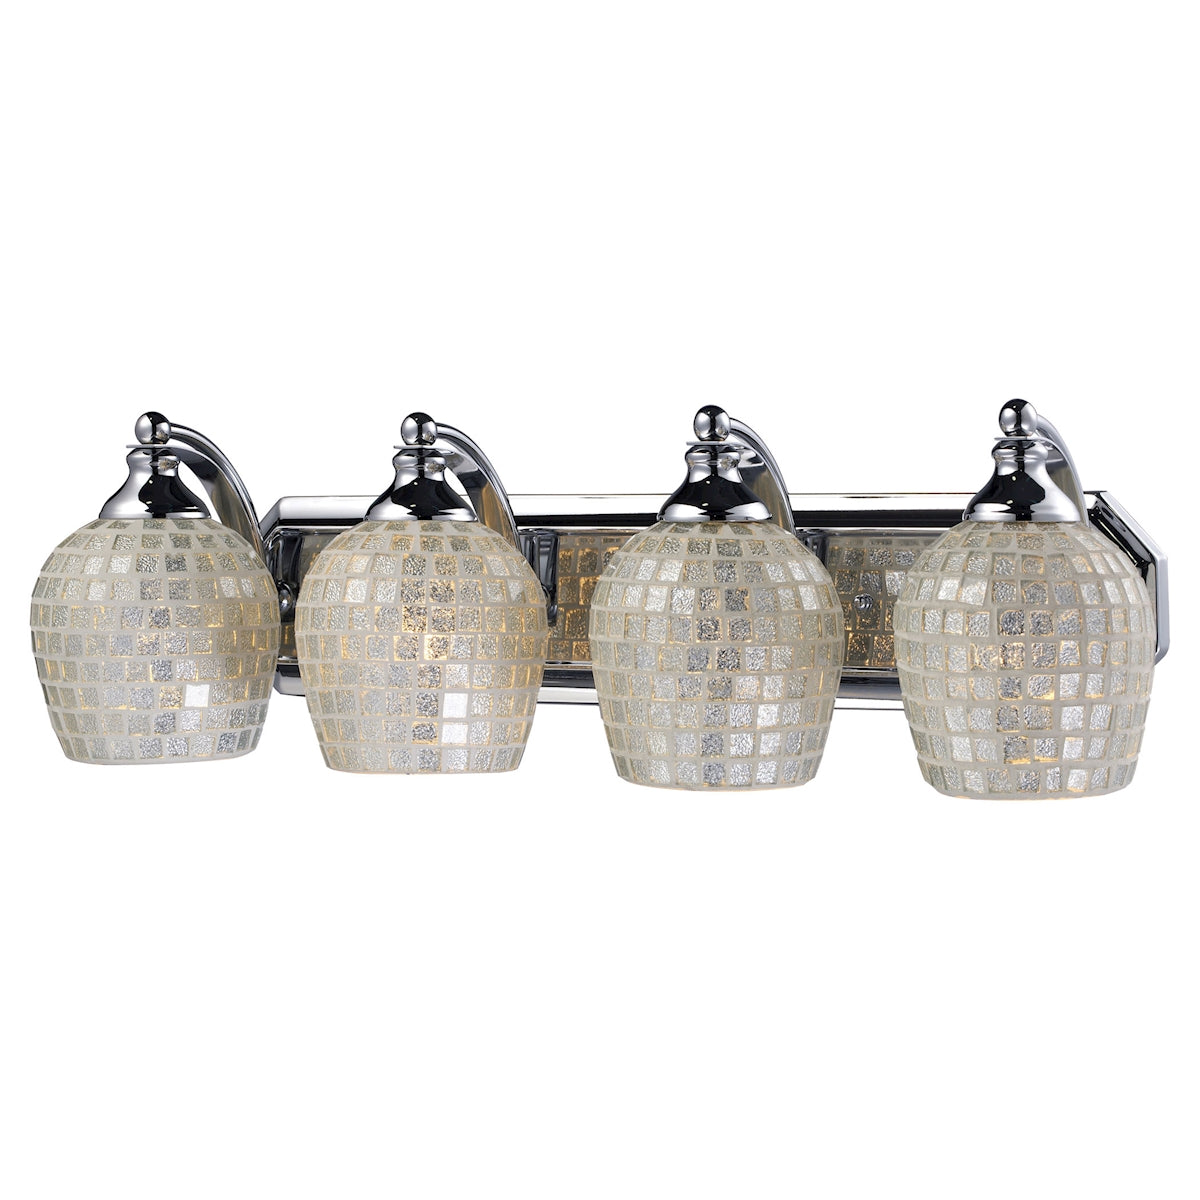 ELK Lighting 570-4C-SLV Mix and Match Vanity 4-Light Wall Lamp in Chrome with Silver Glass